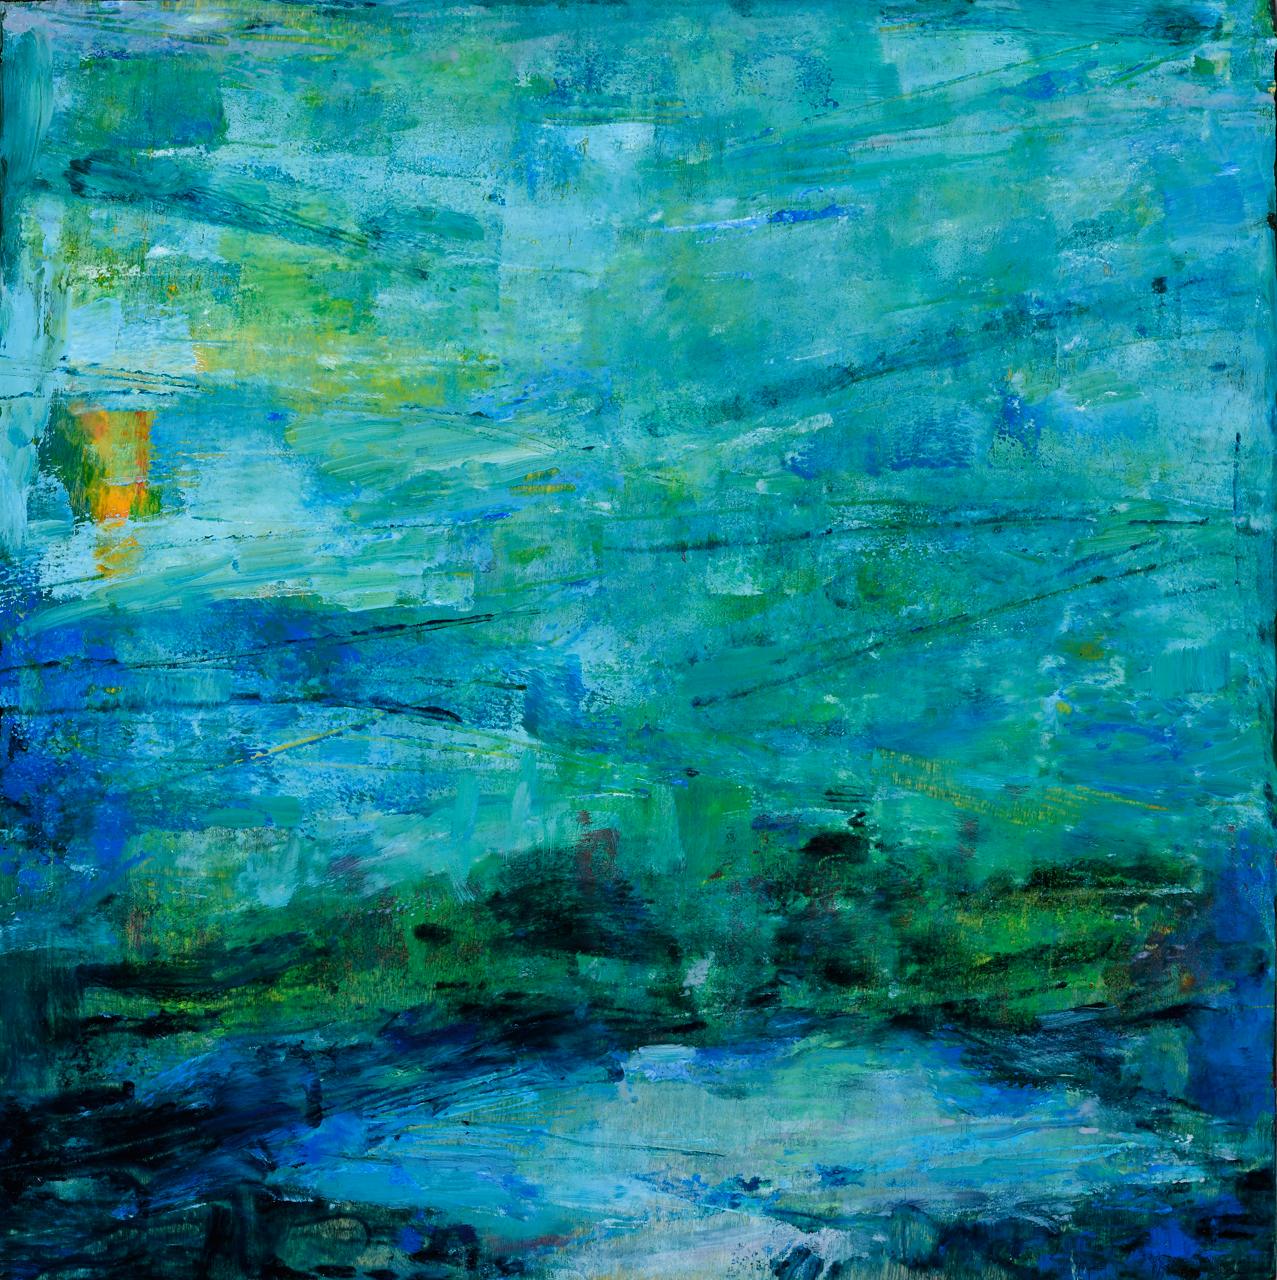 Linda Whittemore Abstract Painting - "Gift of Spirit" Abstract with Blues and Sea Greens by Maui Artist